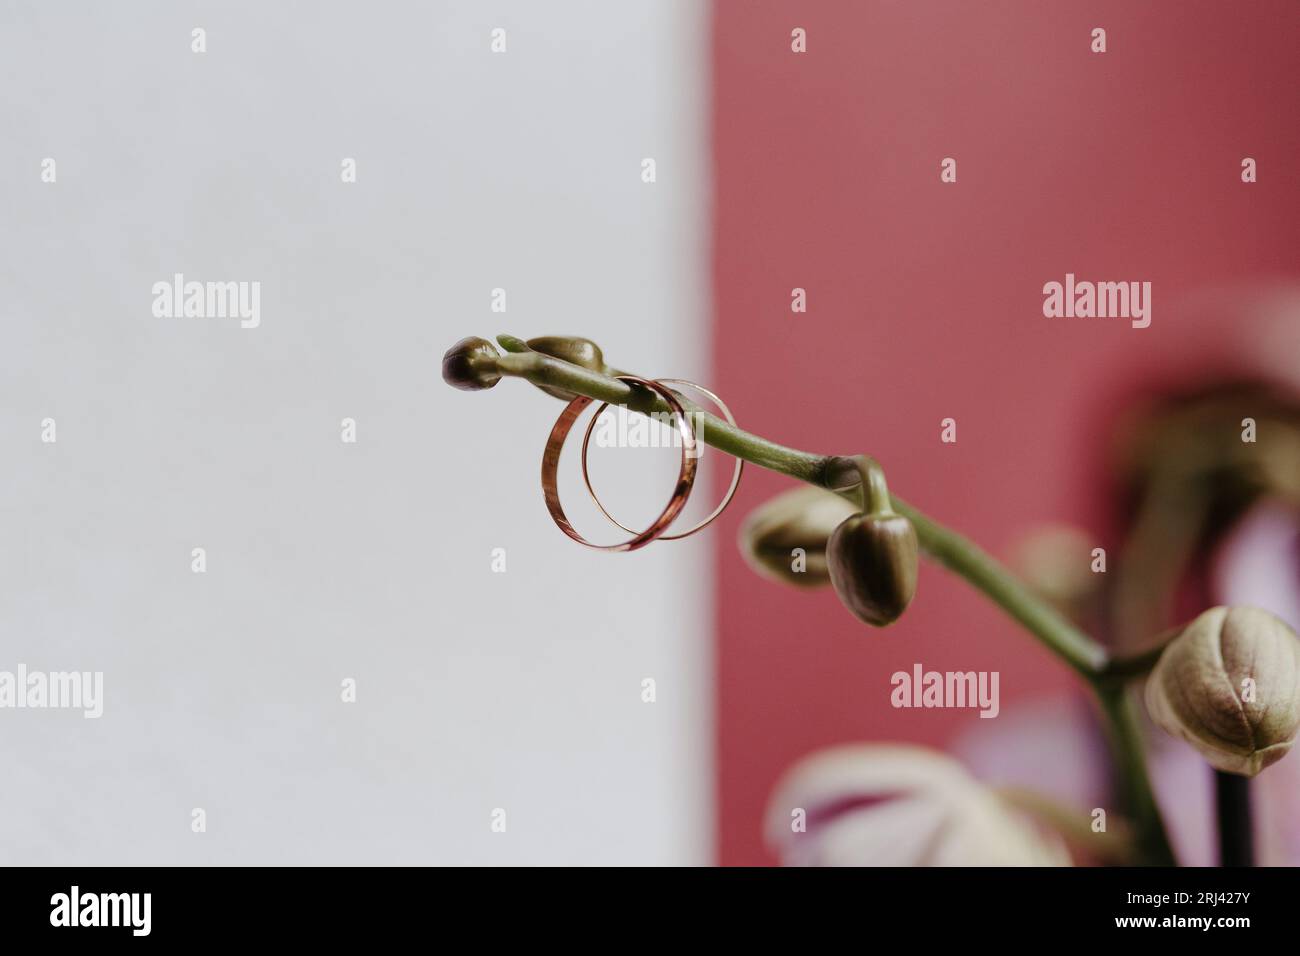 An isolated close-up image of two golden rings resting atop a thin orchid stem Stock Photo